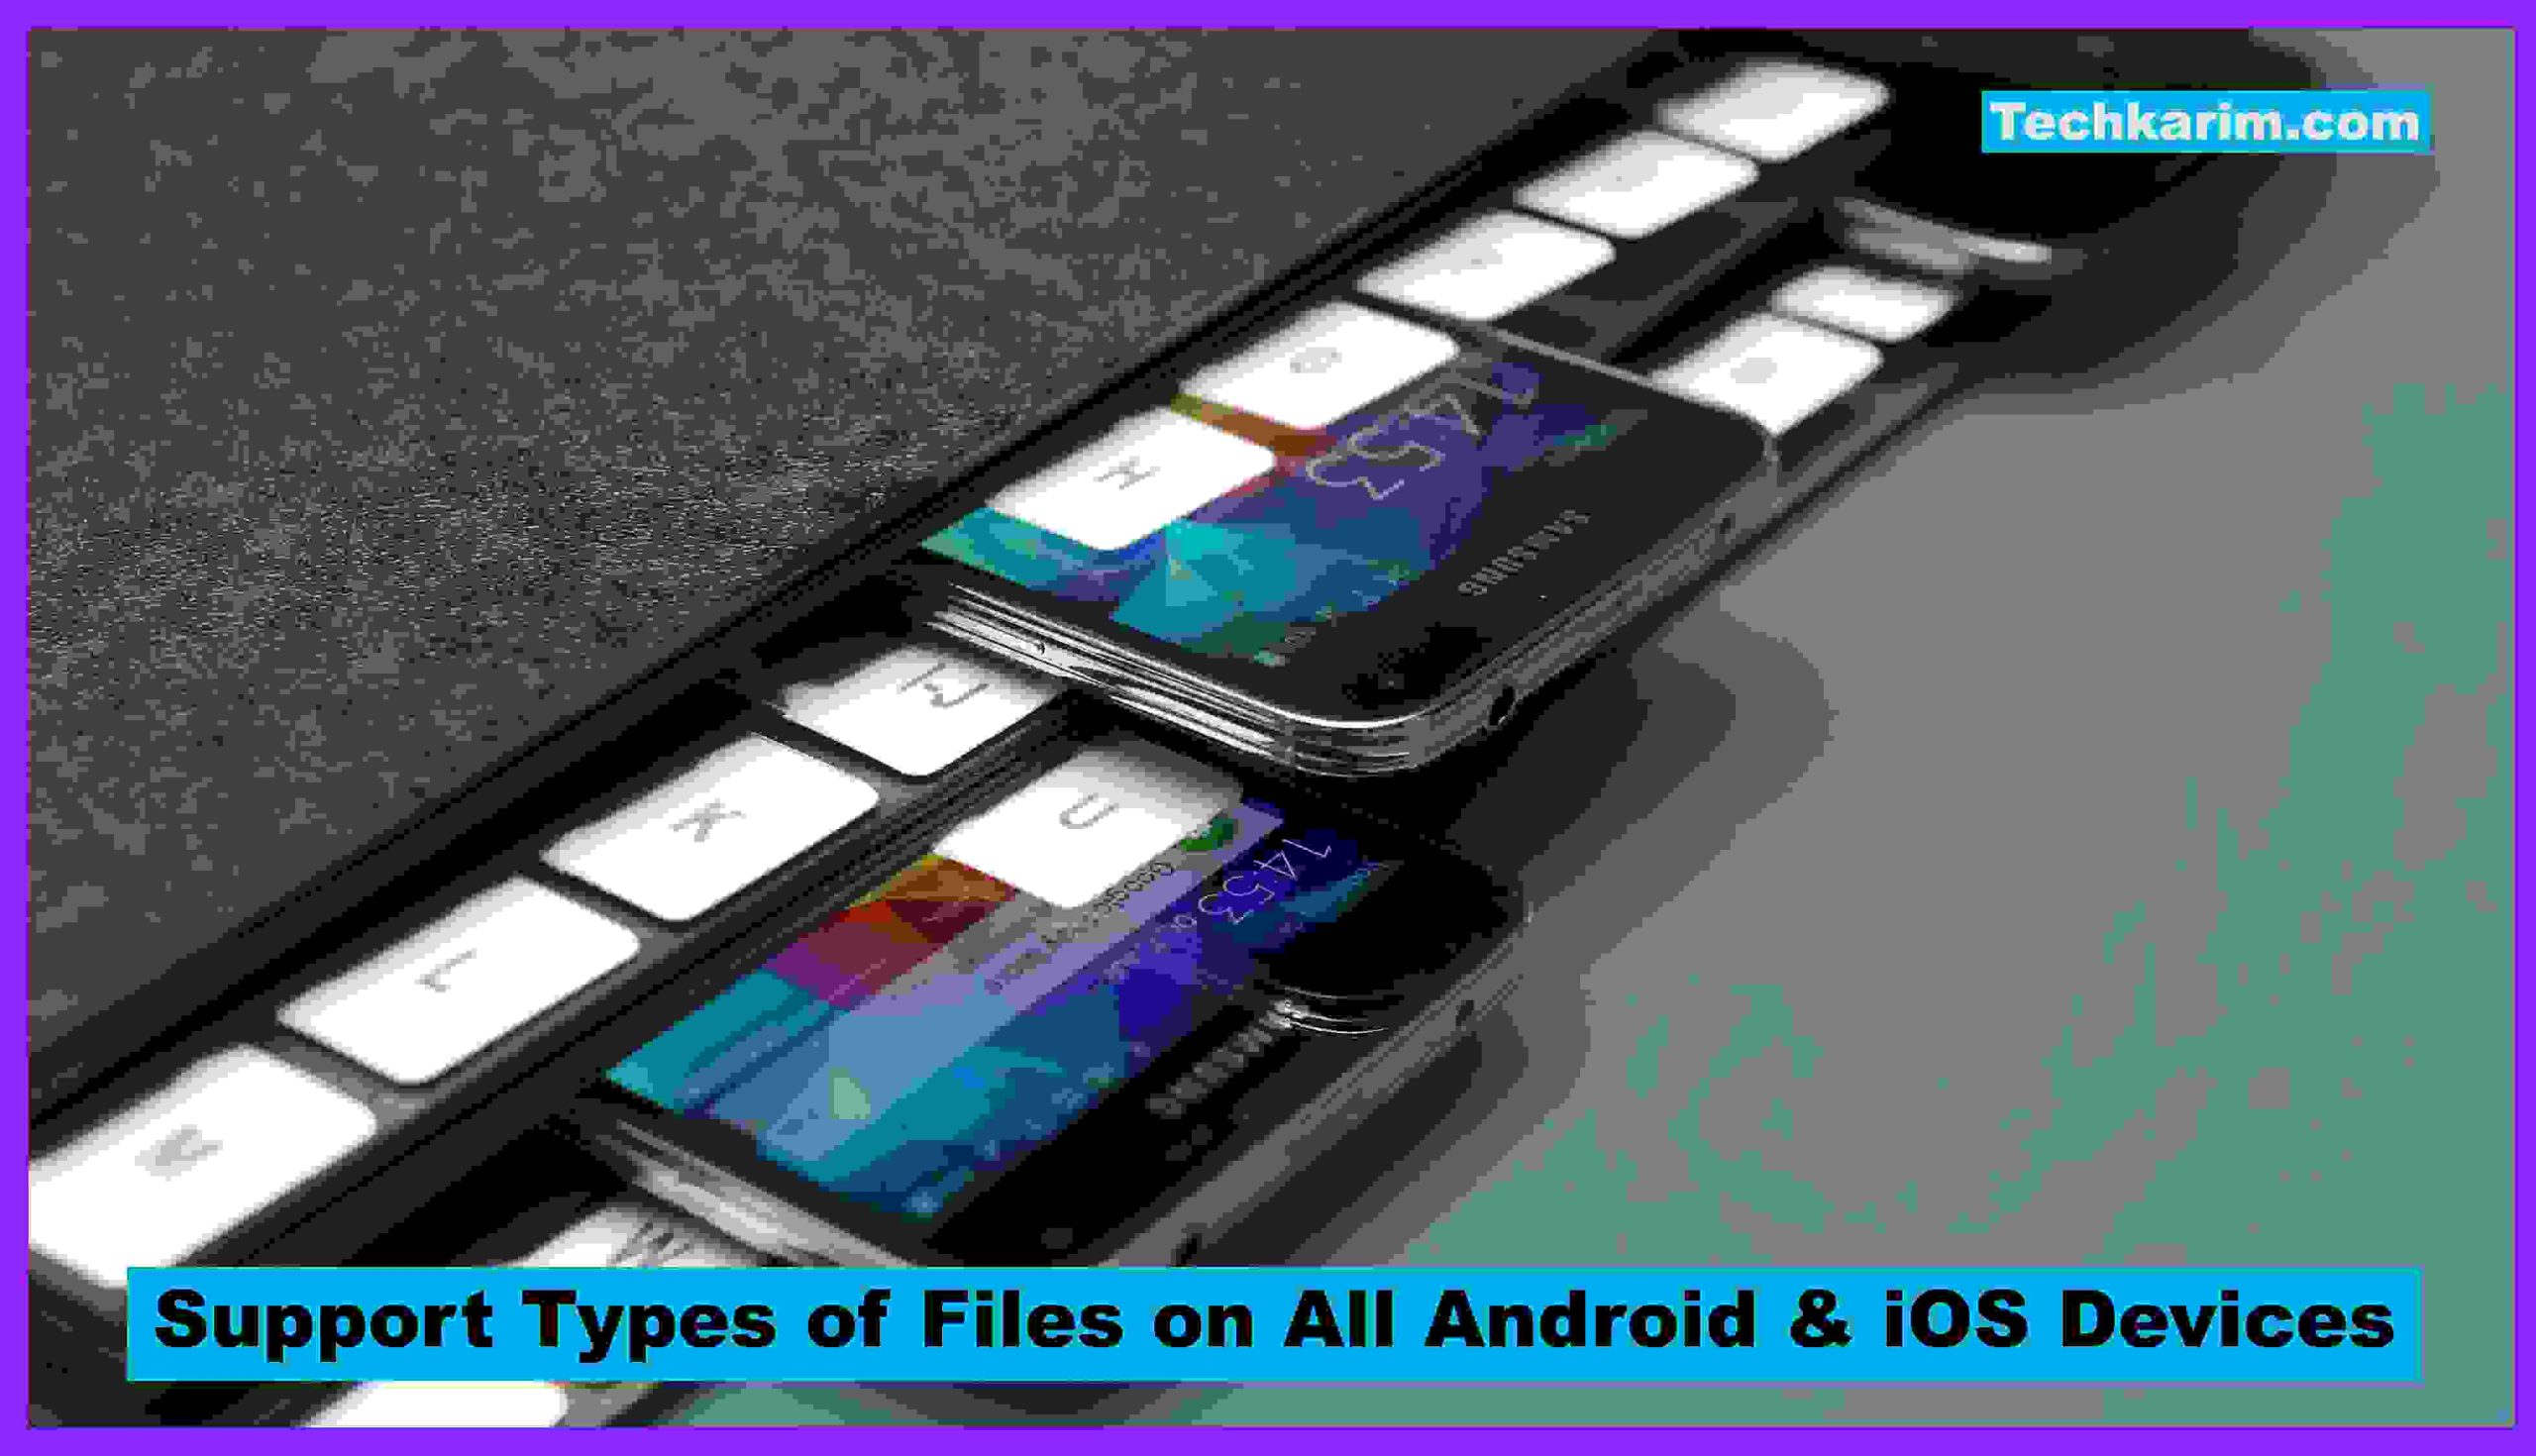 Support Types of Files on All Android & iOS Devices